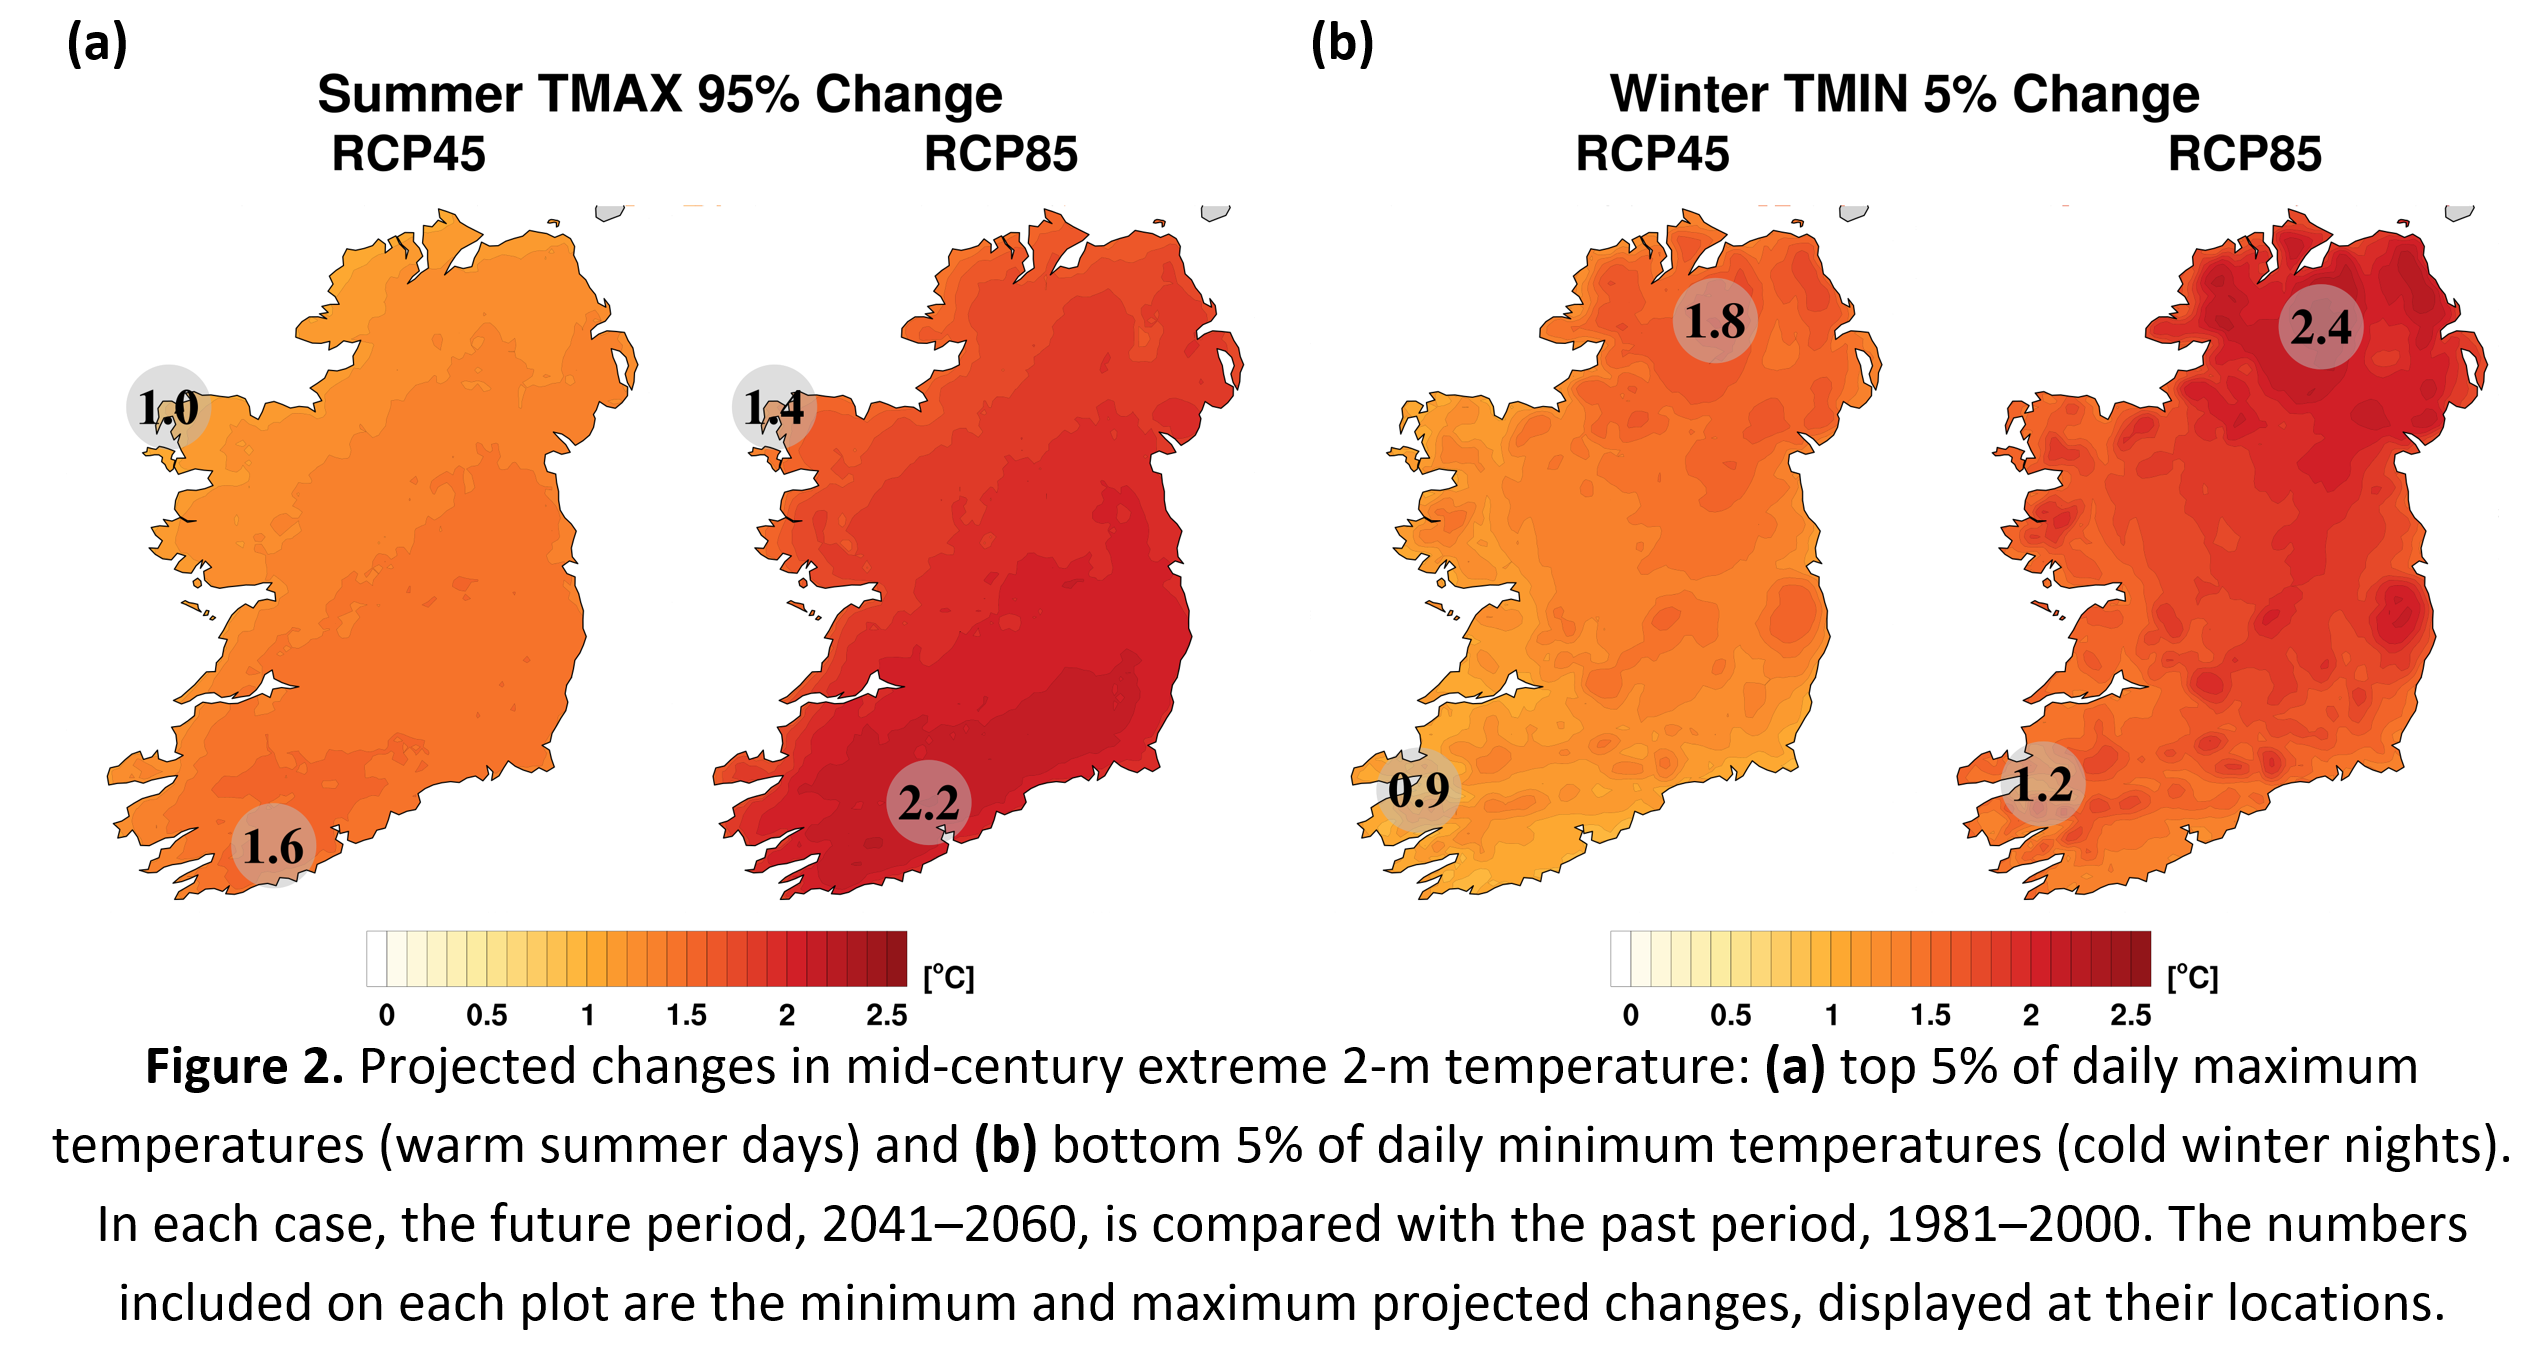 Figure 2. Projected changes in mid-century extreme 2-m temperature: (a) top 5% of daily maximum temperatures (warm summer days) and (b) bottom 5% of daily minimum temperatures (cold winter nights). In each case, the future period, 2041–2060, is compared with the past period, 1981–2000. The numbers included on each plot are the minimum and maximum projected changes, displayed at their locations.